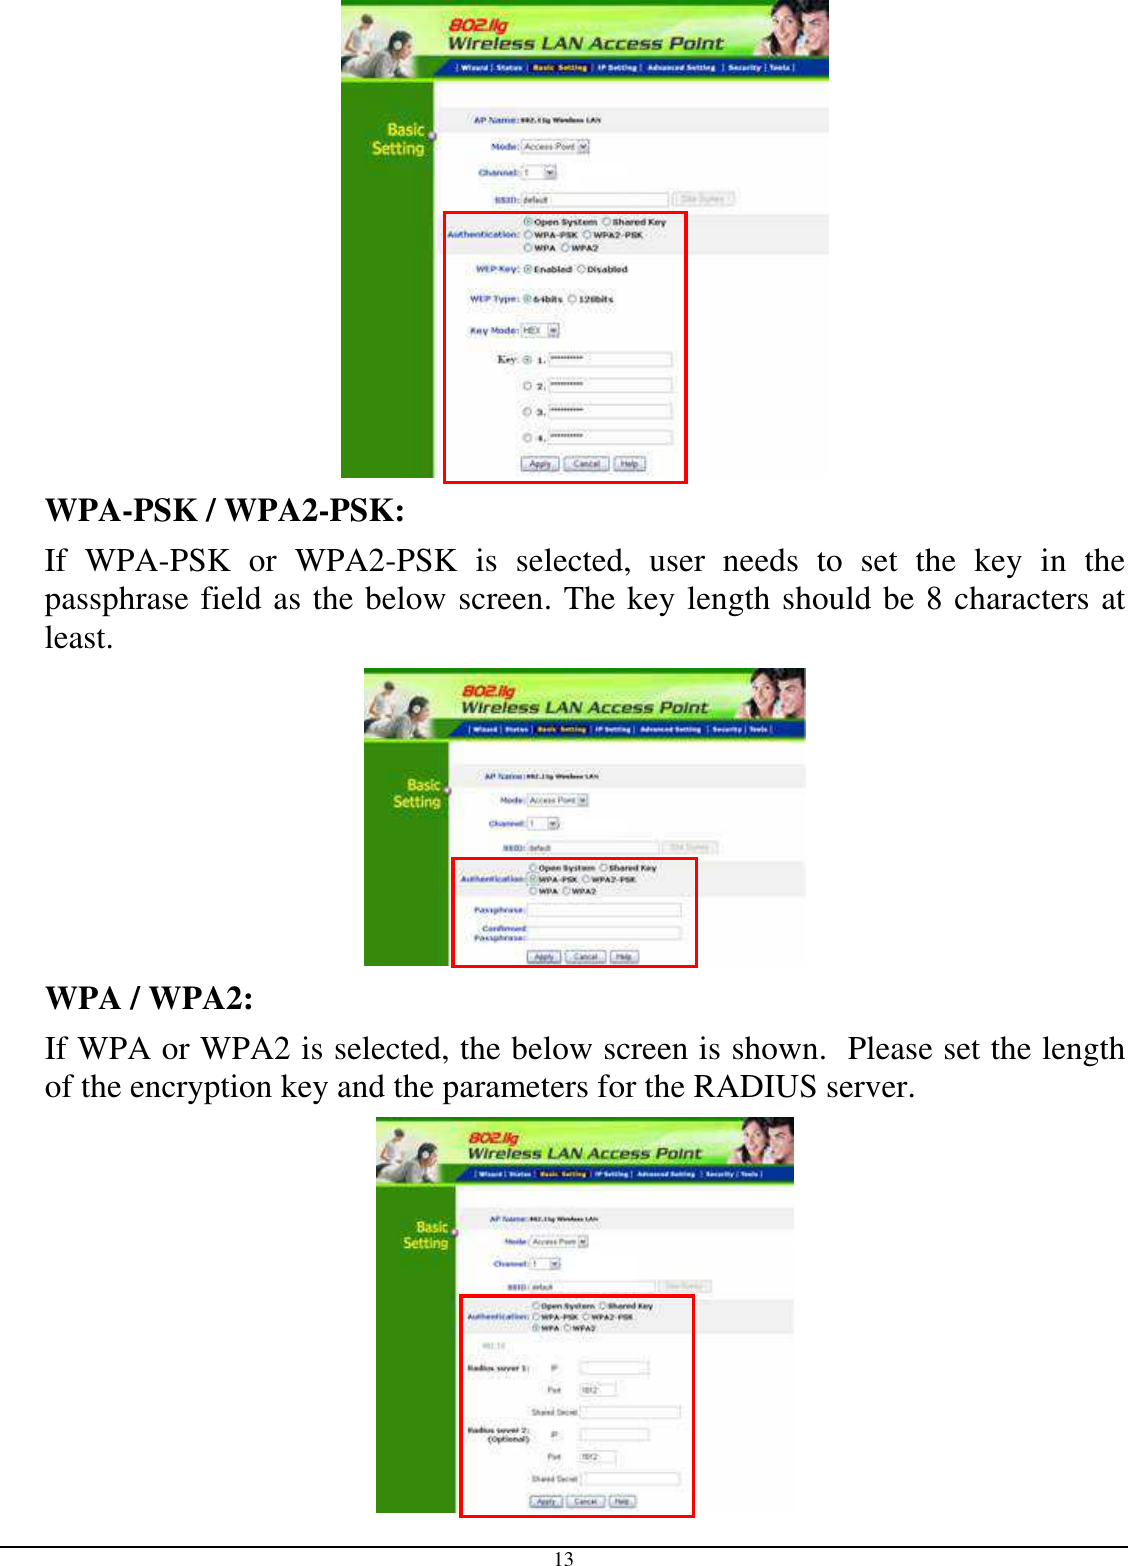  13  WPA-PSK / WPA2-PSK:    If  WPA-PSK  or  WPA2-PSK  is  selected,  user  needs  to  set  the  key  in  the passphrase field as the below screen. The key length should be 8 characters at least.  WPA / WPA2:  If WPA or WPA2 is selected, the below screen is shown.  Please set the length of the encryption key and the parameters for the RADIUS server.  